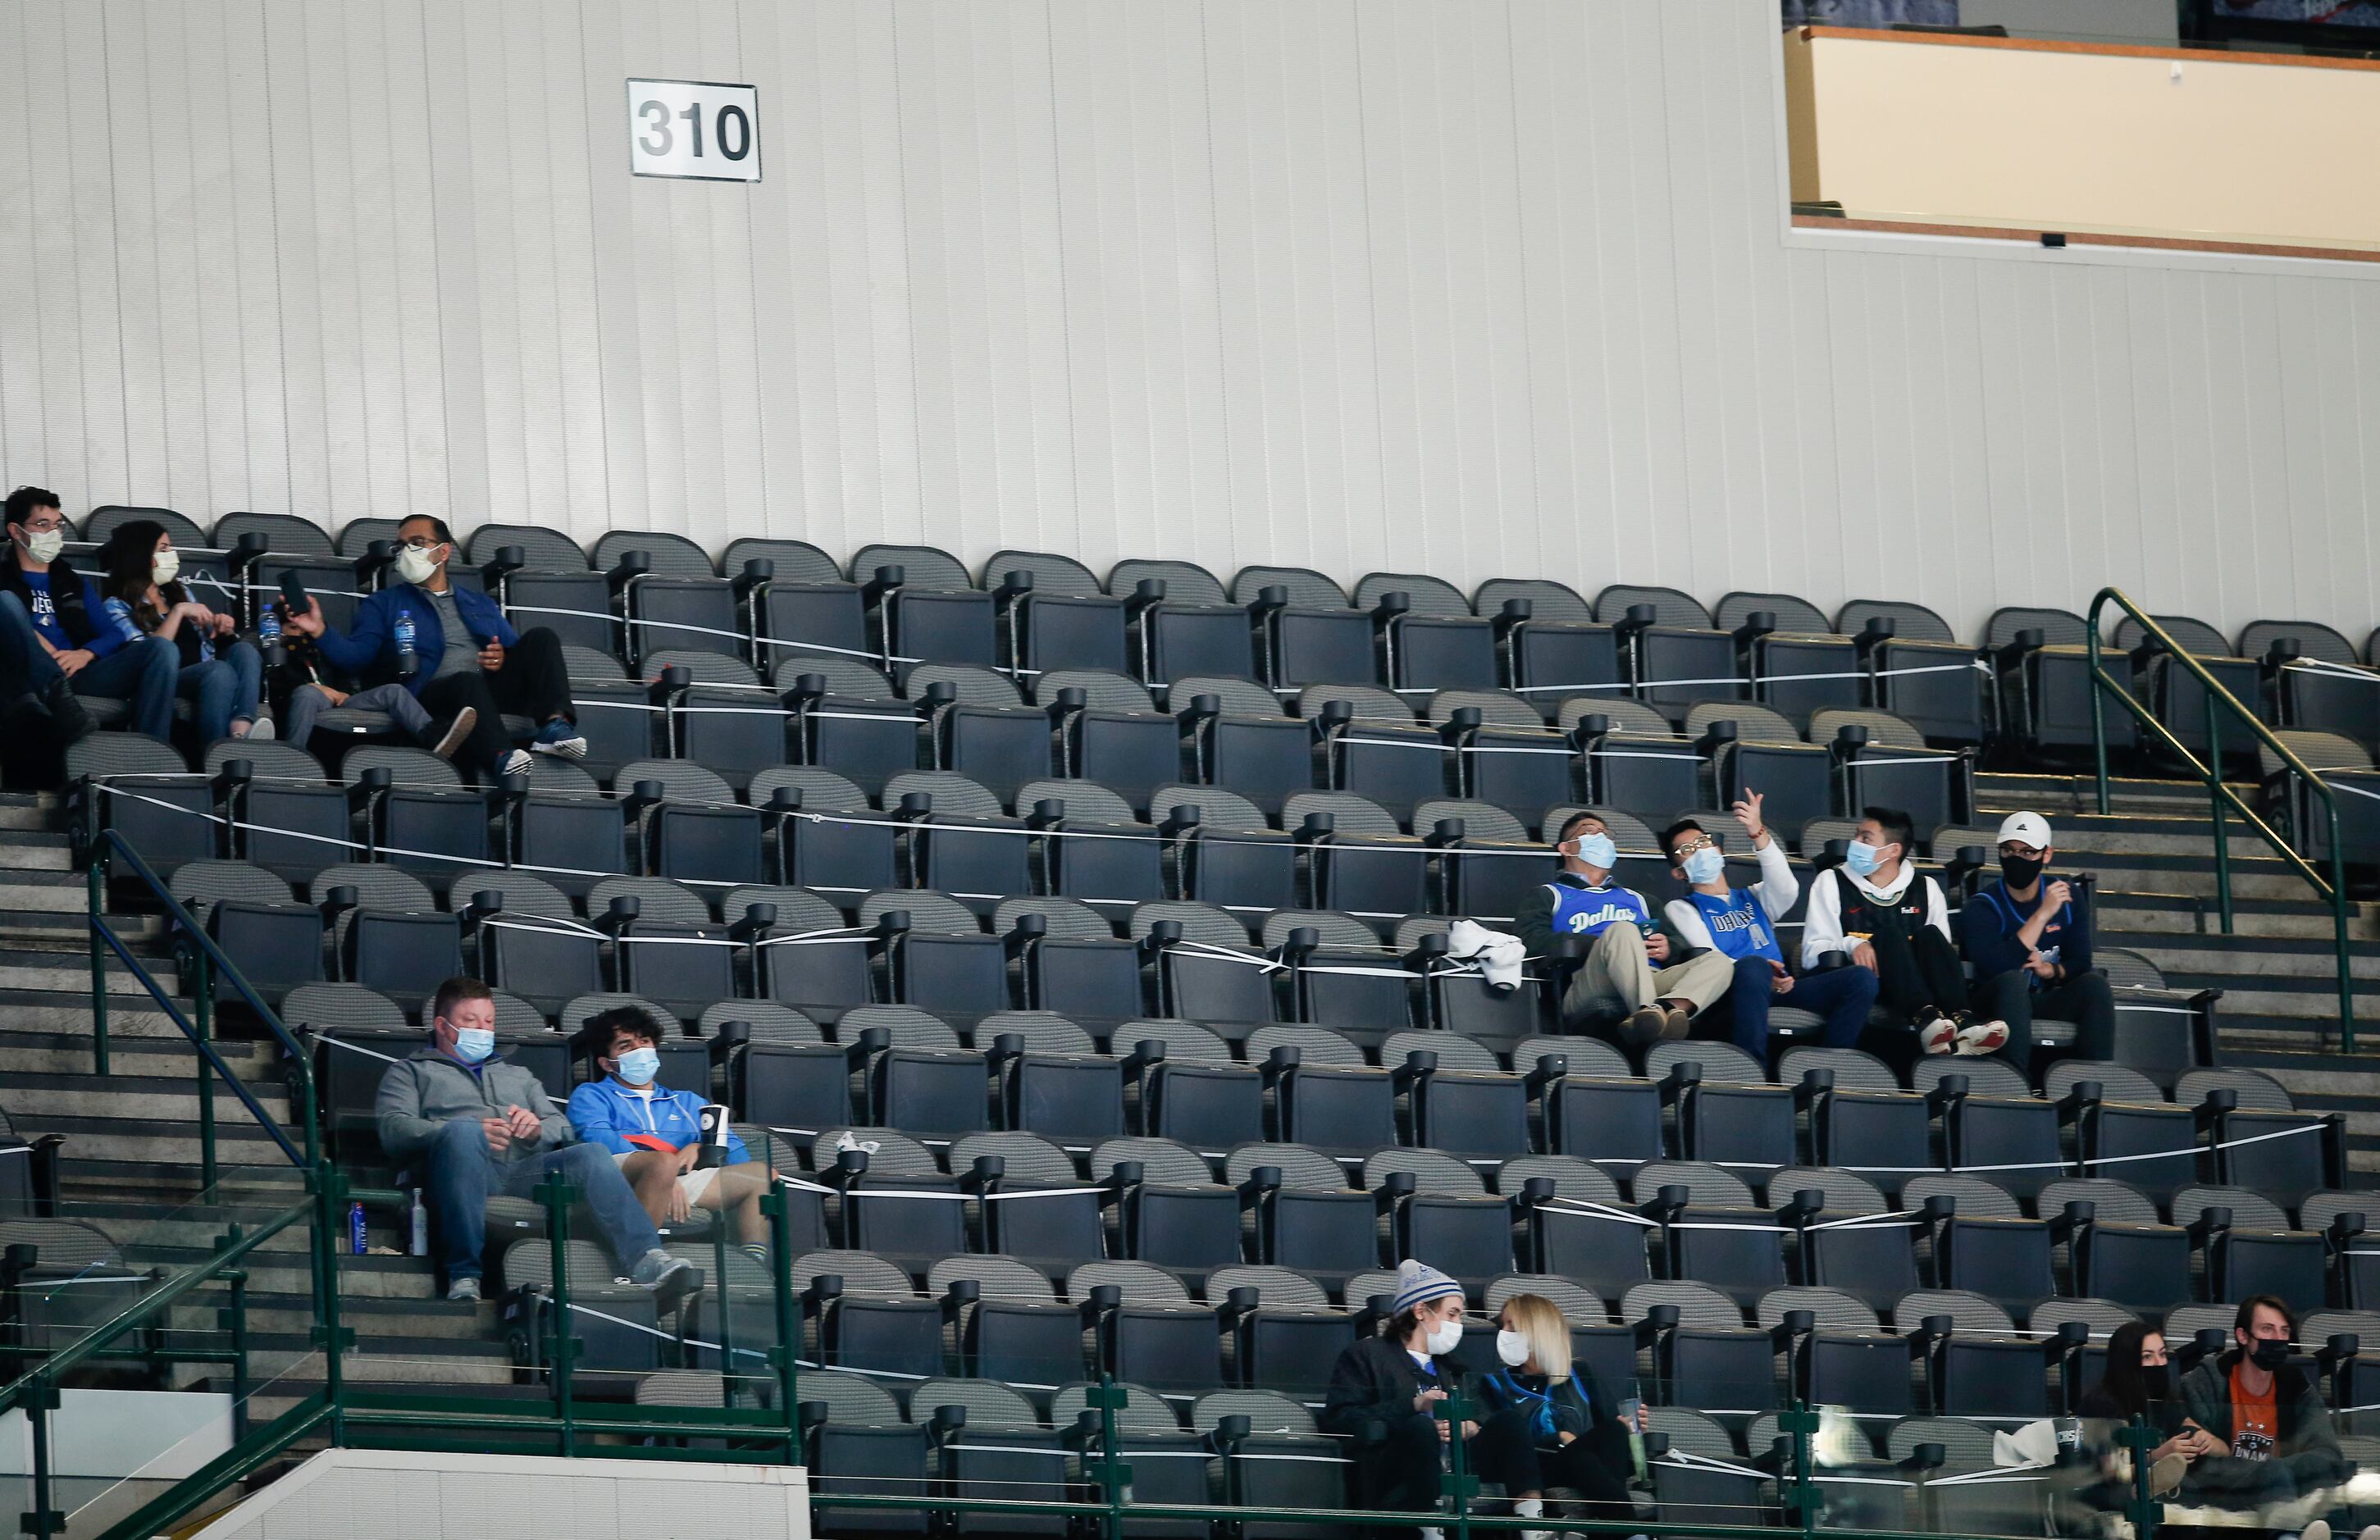 Fans sitting in the 310 section, consisting mostly of health care workers, attend the...